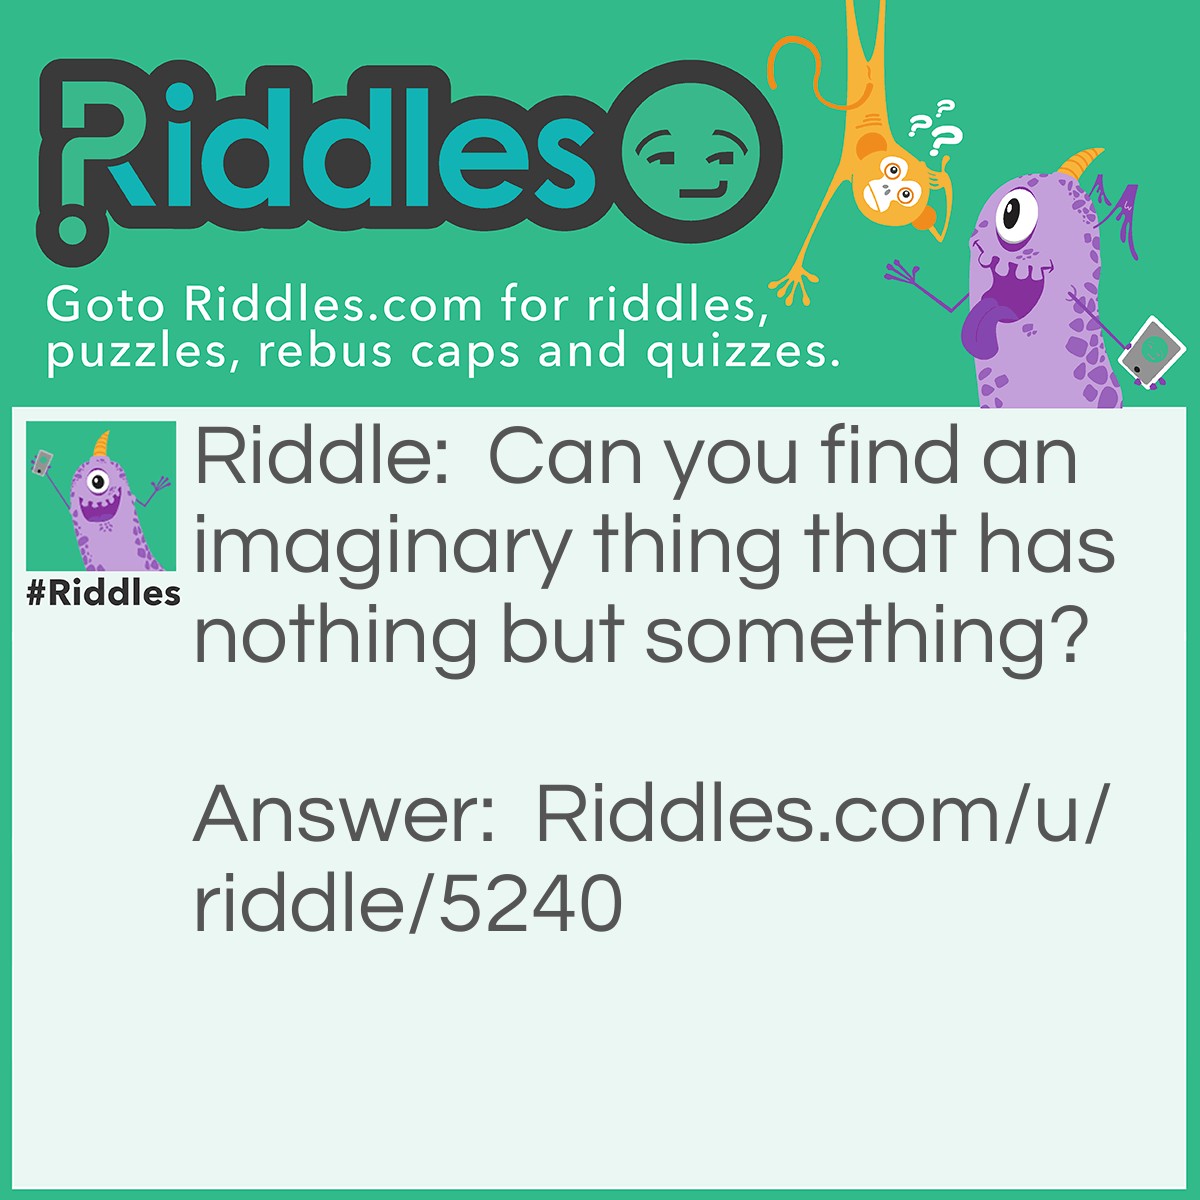 Riddle: Can you find an imaginary thing that has nothing but something? Answer: The number 0.